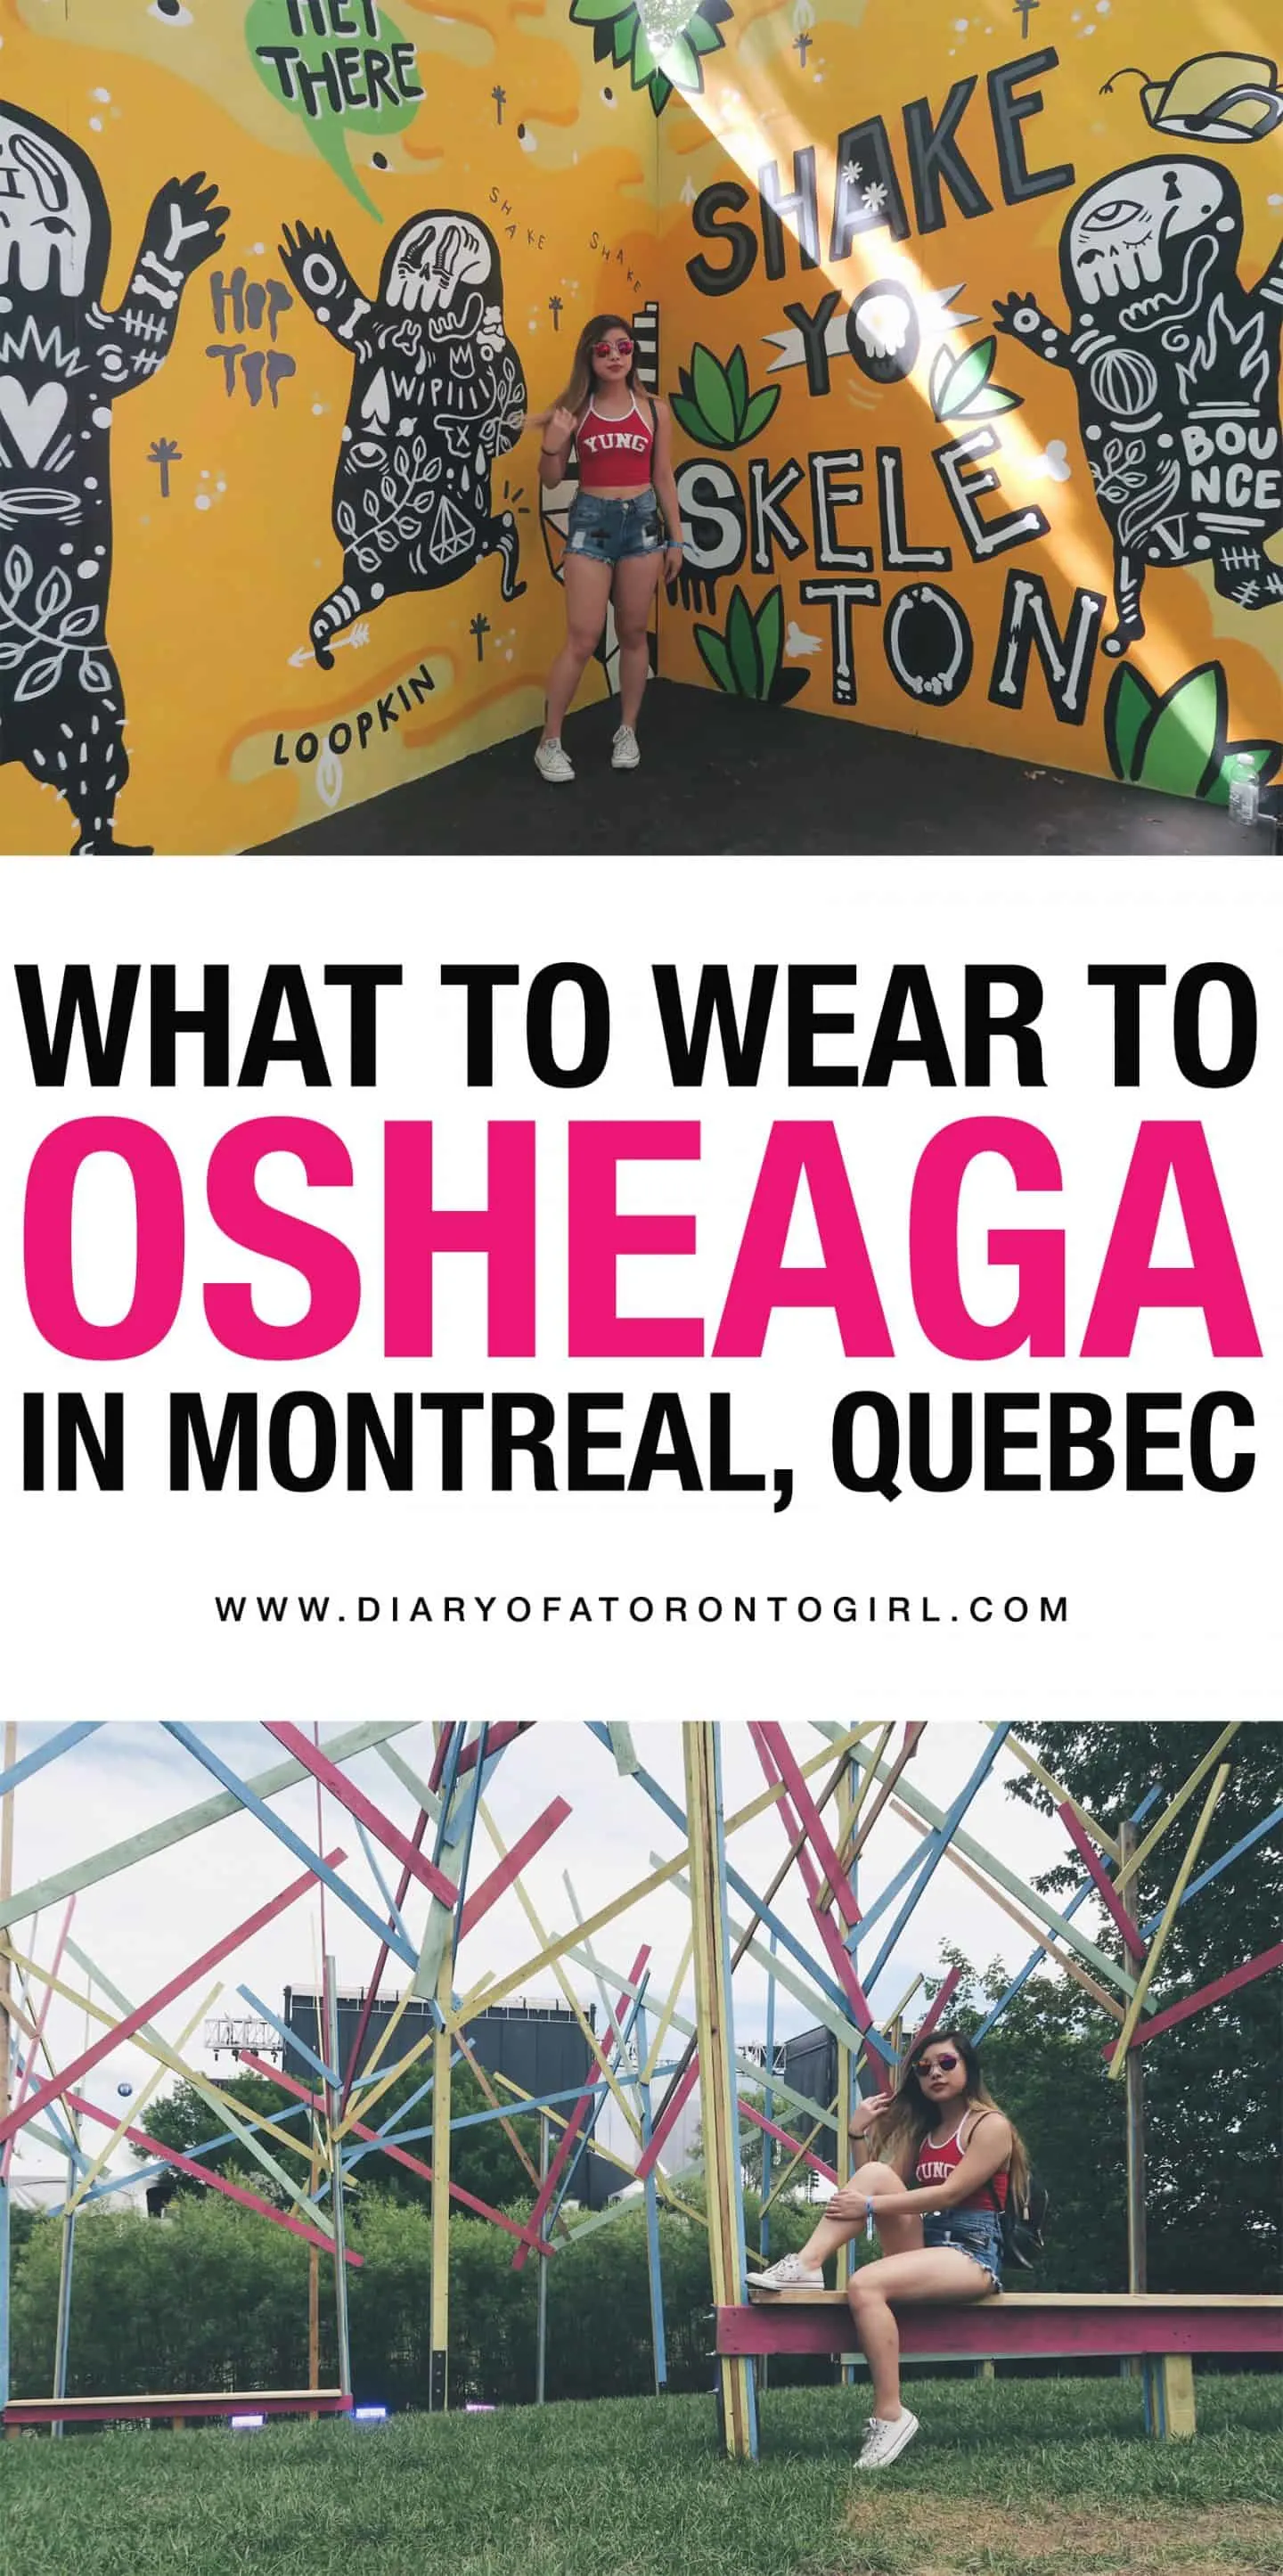 Looking for Osheaga outfit ideas? Here is some inspiration on what to wear to the Osheaga Music Festival in Montreal, Quebec!